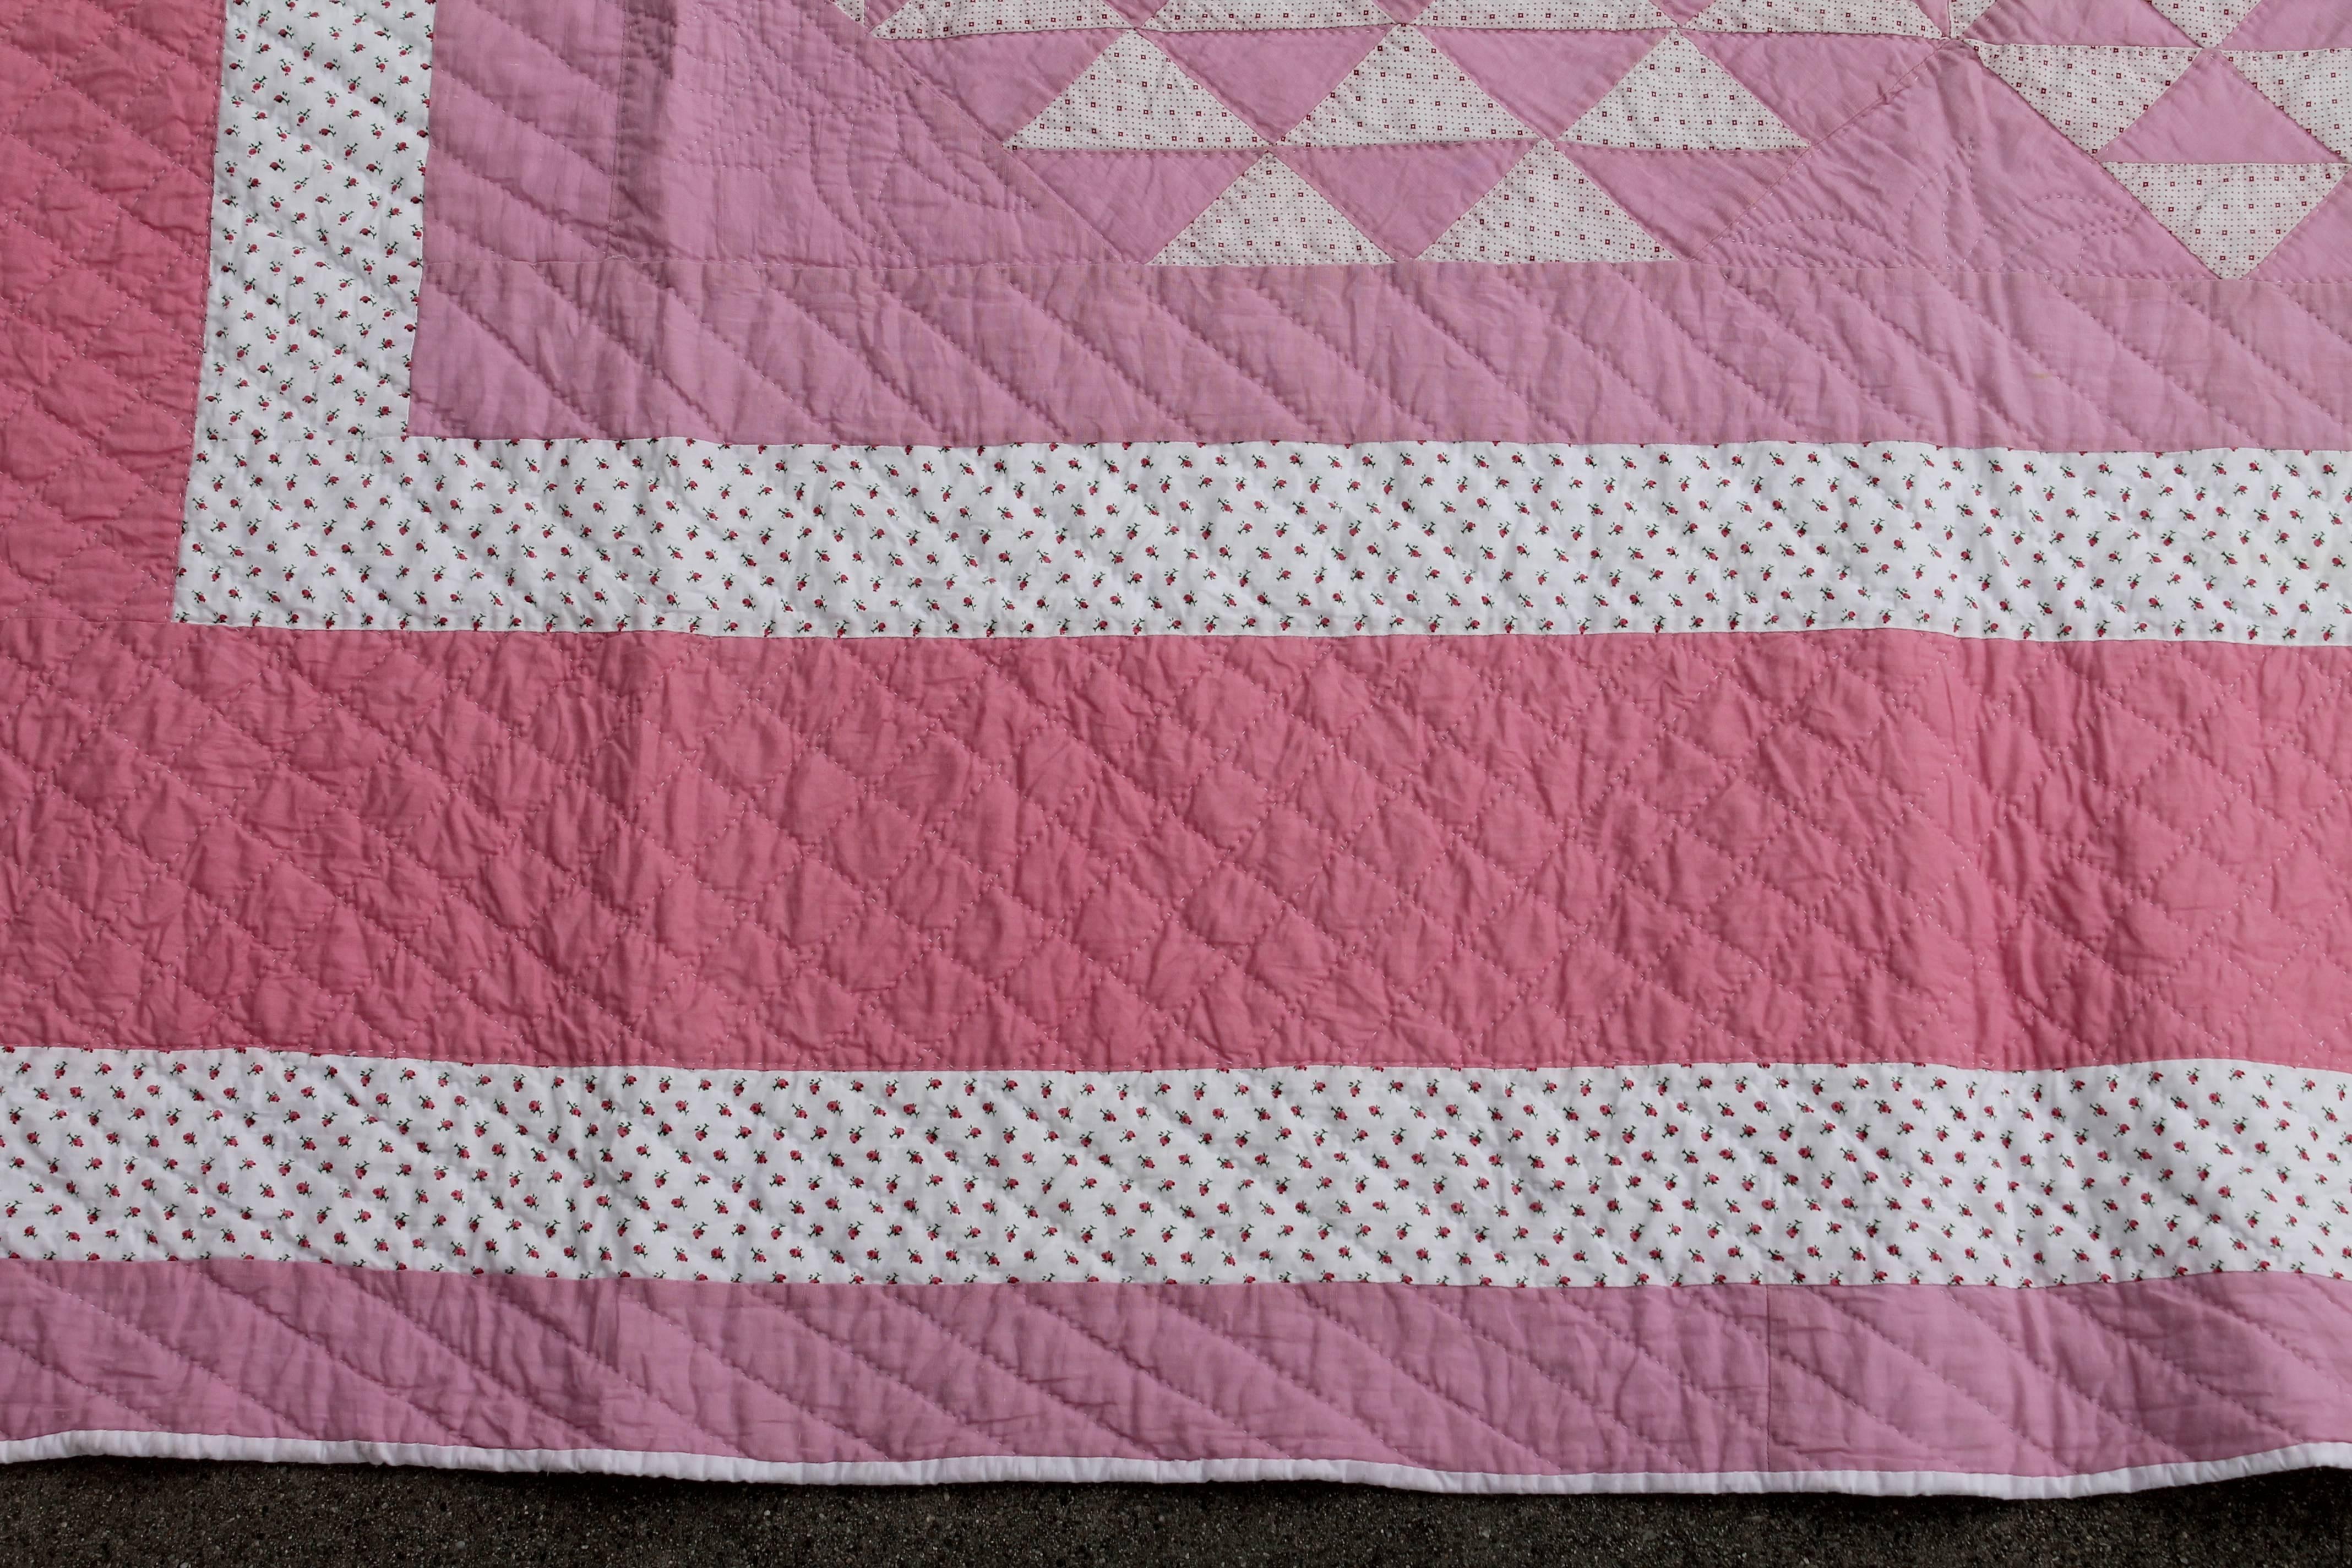 Other Pink and White Quilt in Contained Flying Geese Pattern